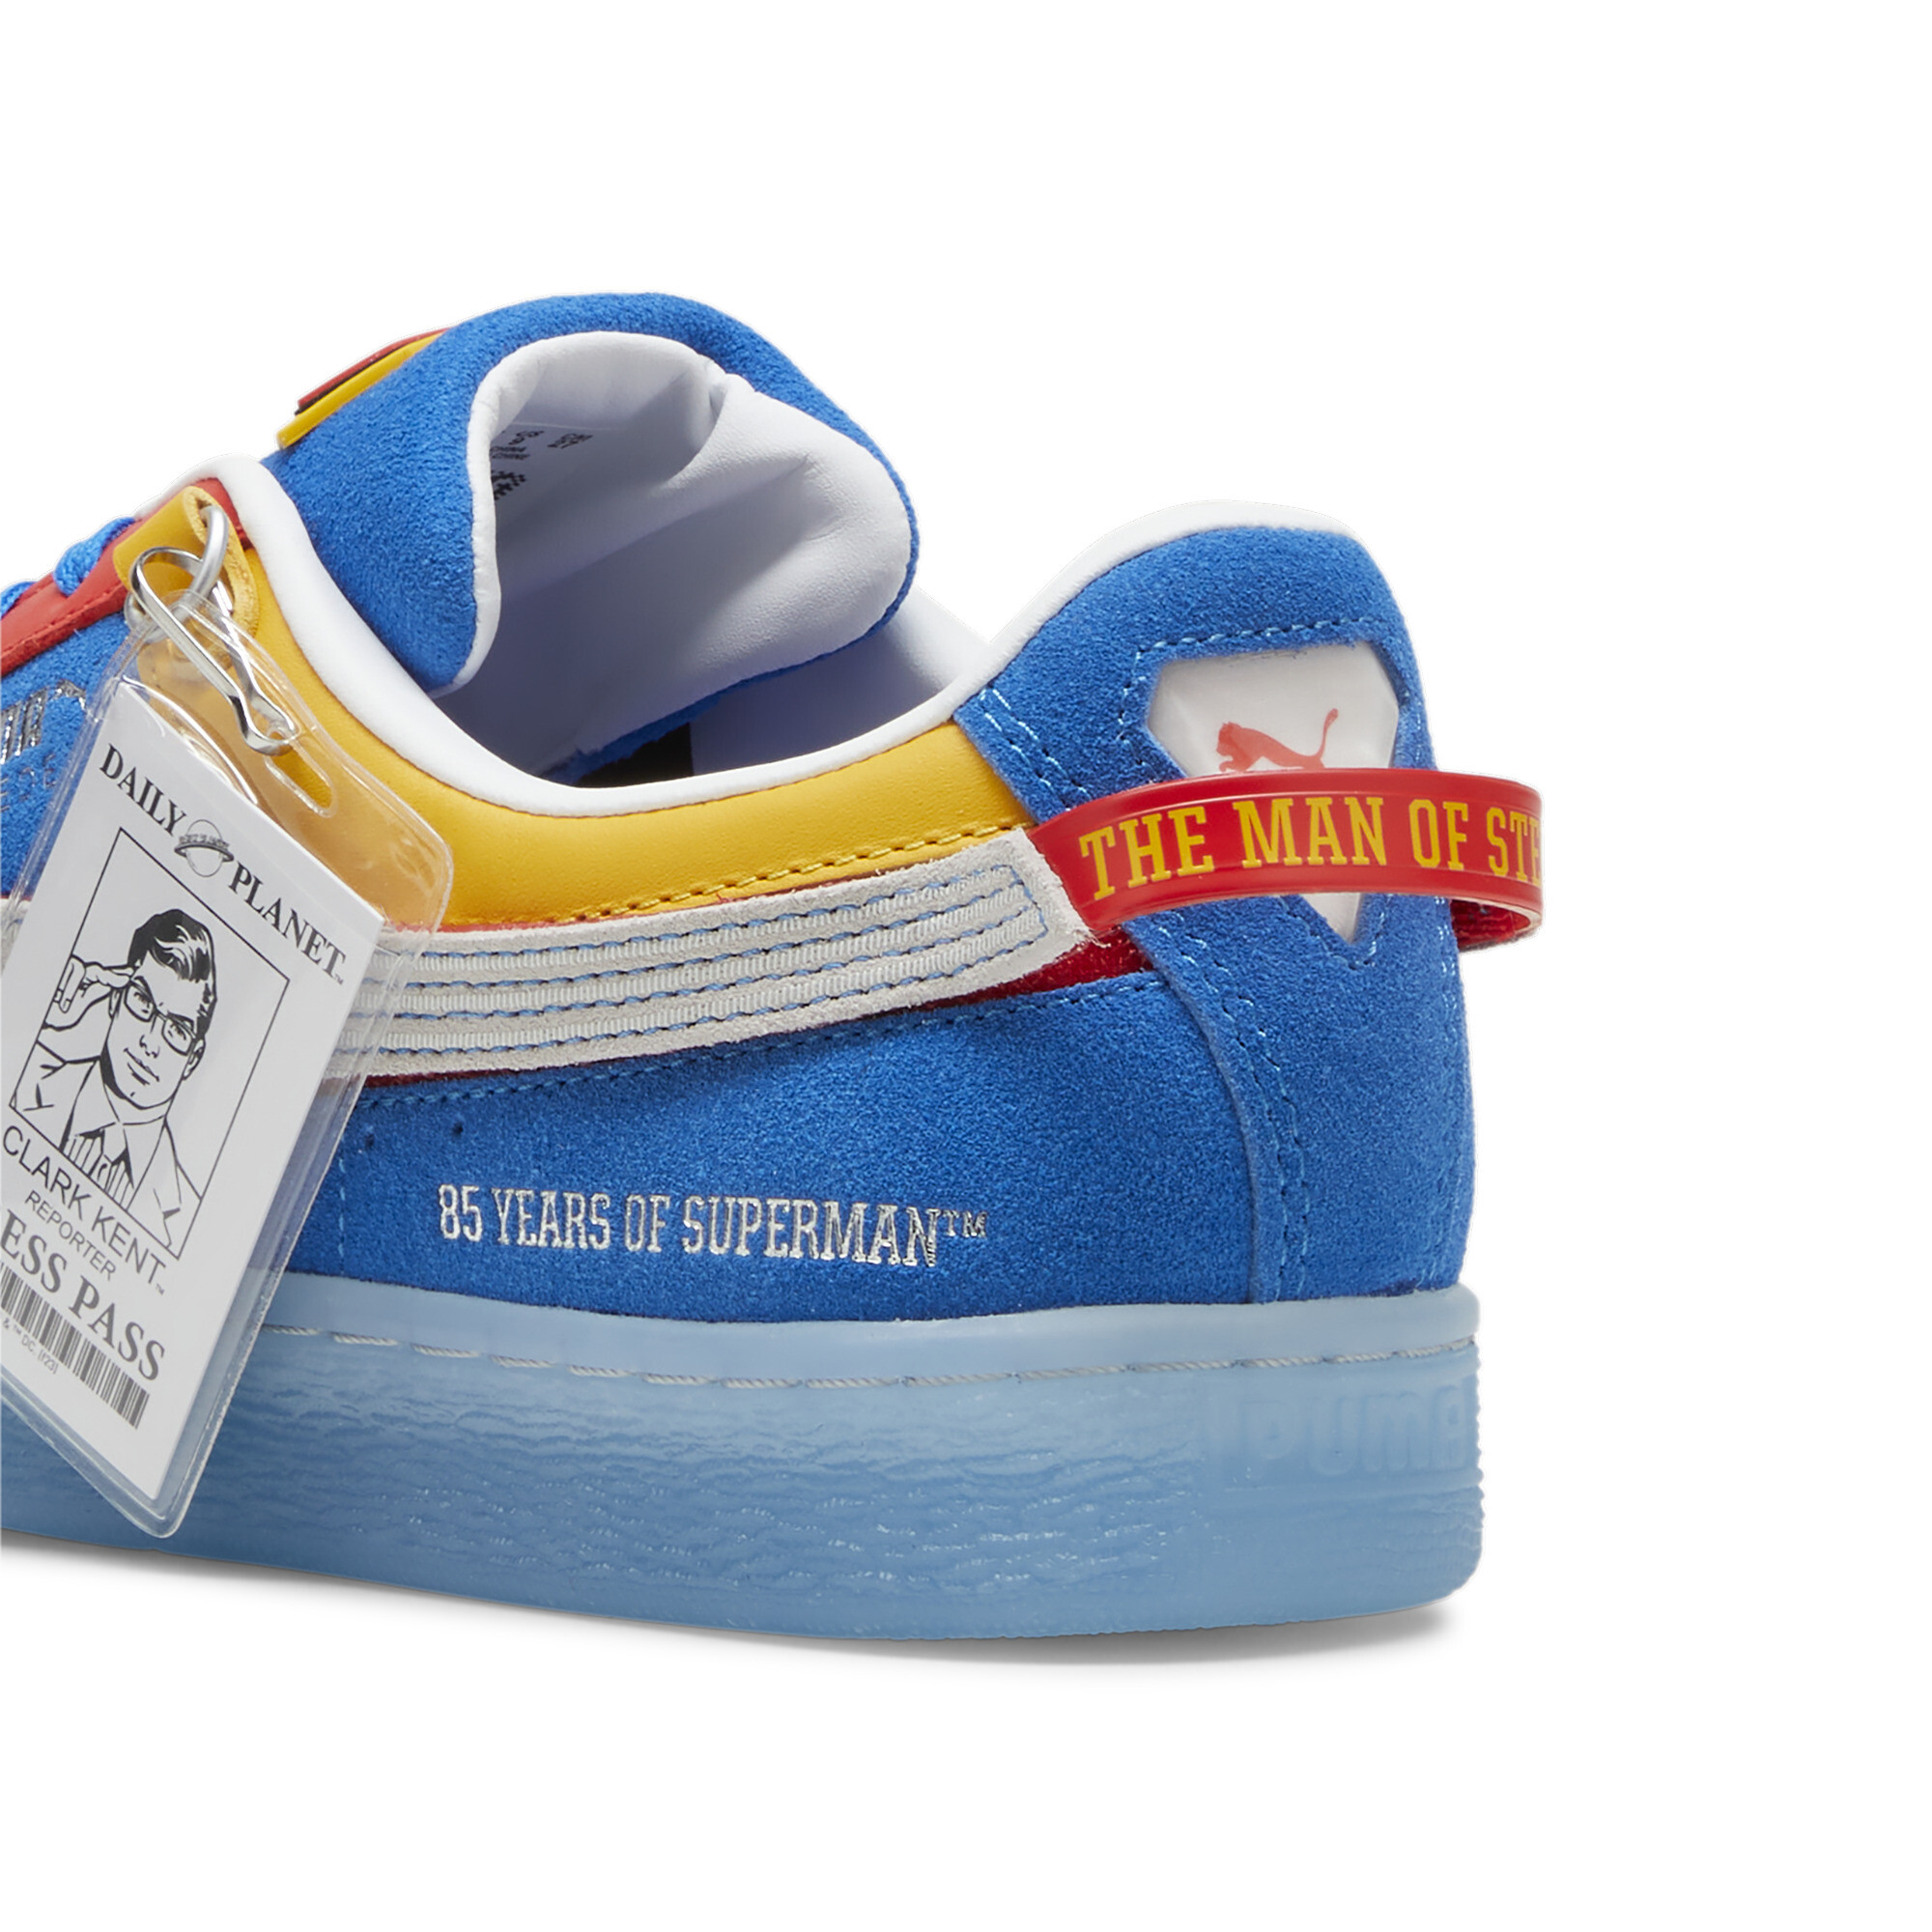 Puma X SUPERMAN 85th Anniversary Suede Sneakers, Blue, Size 44, Shoes